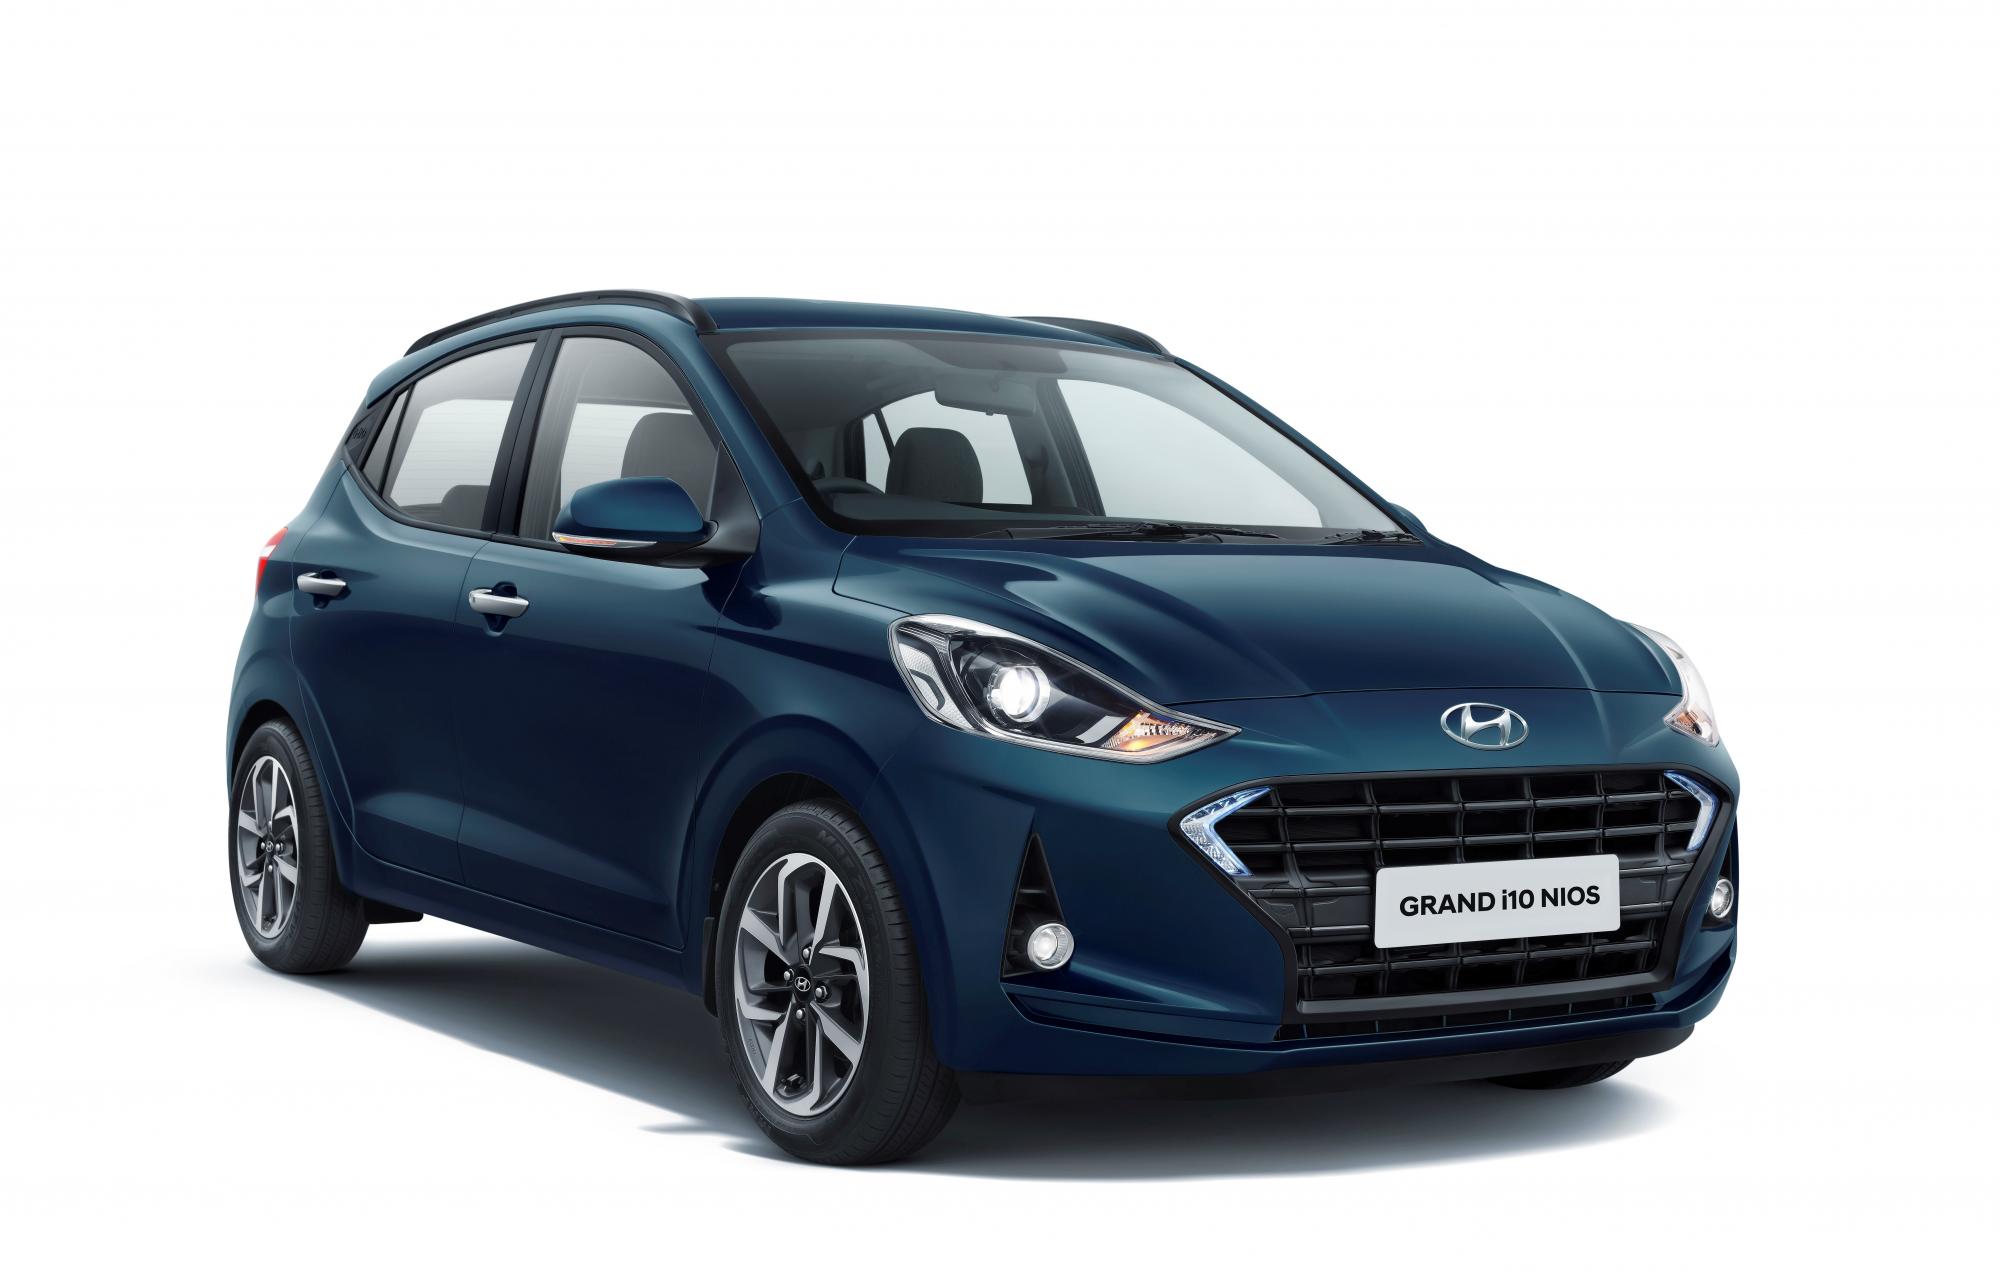 2019 Hyundai Grand I10 Nios Specifications Leaked Report